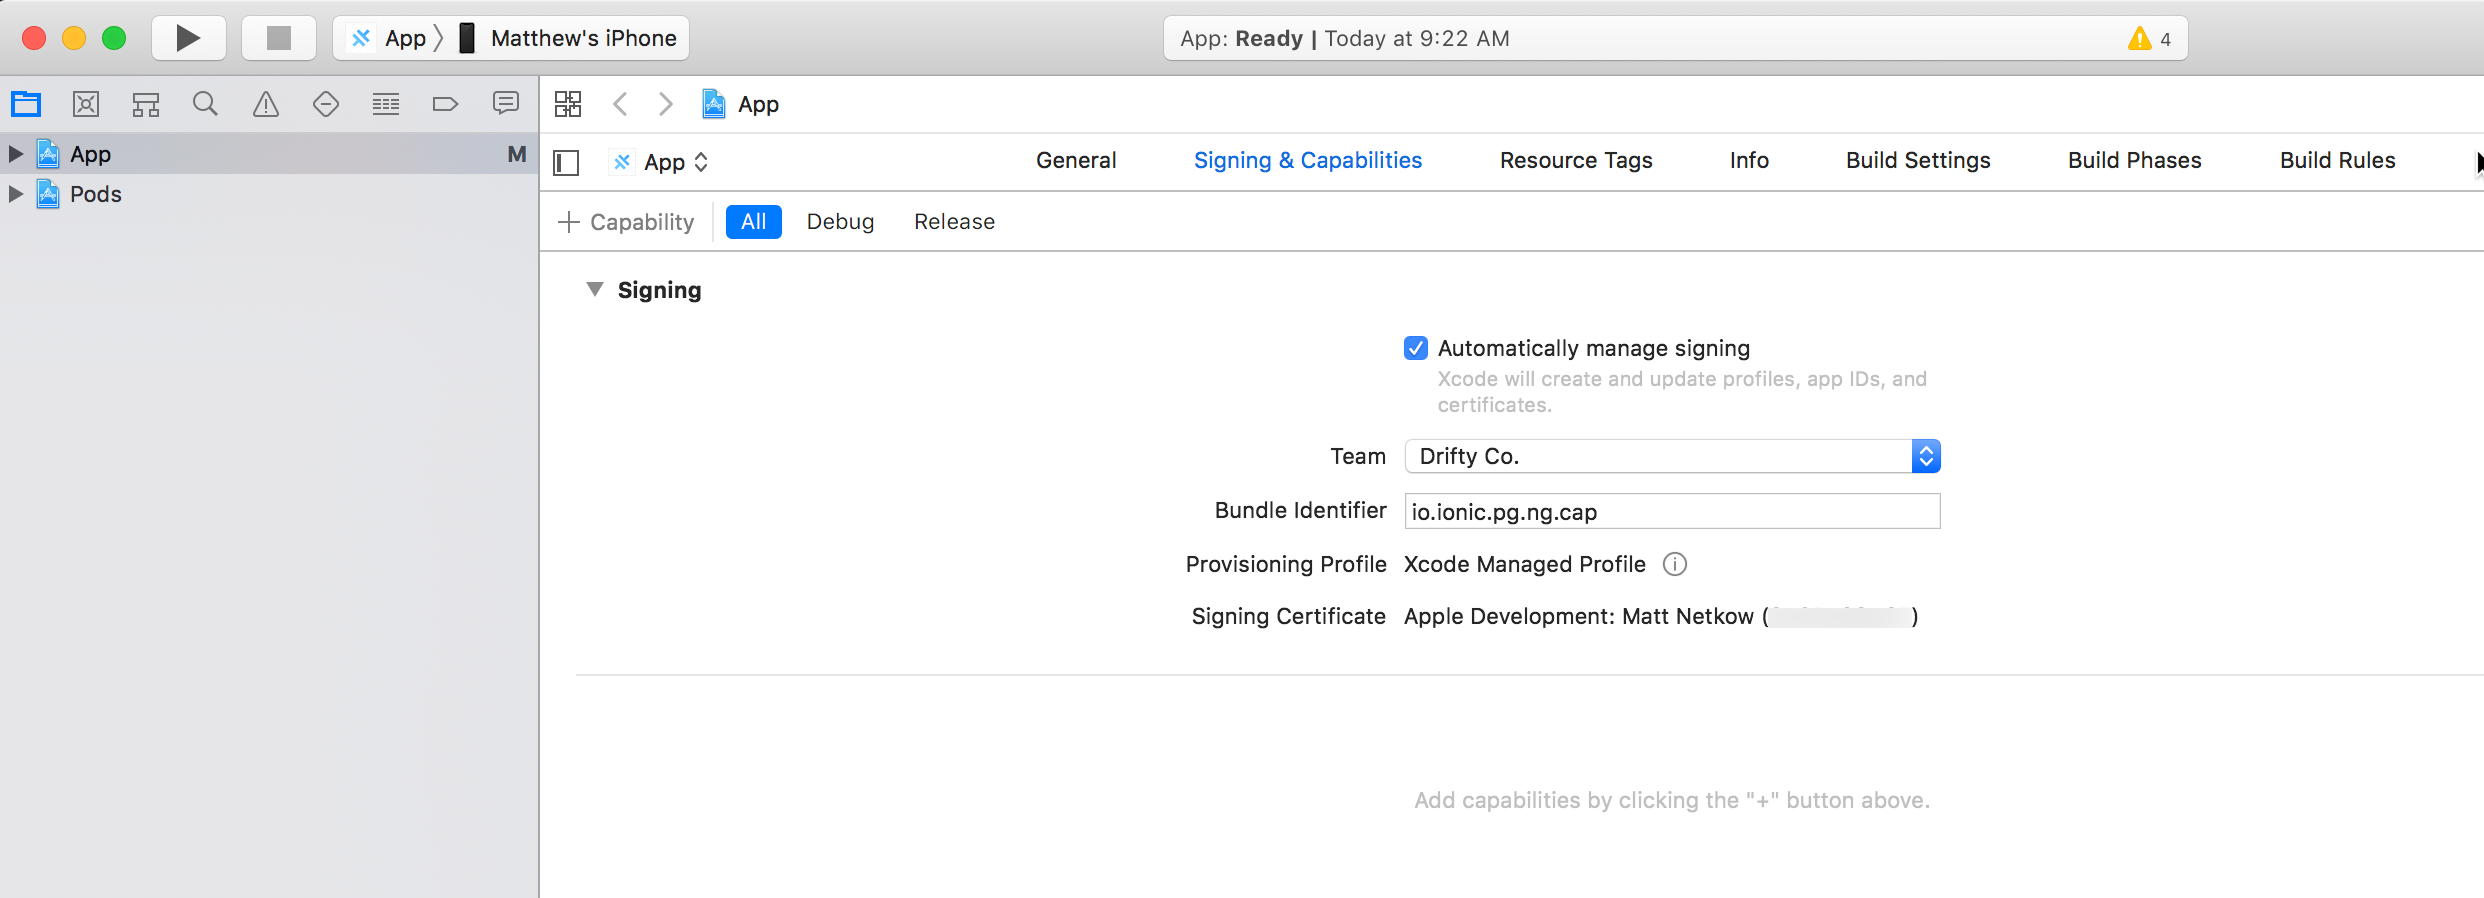 The Xcode interface displaying the Signing and Capabilities tab for an iOS app project.